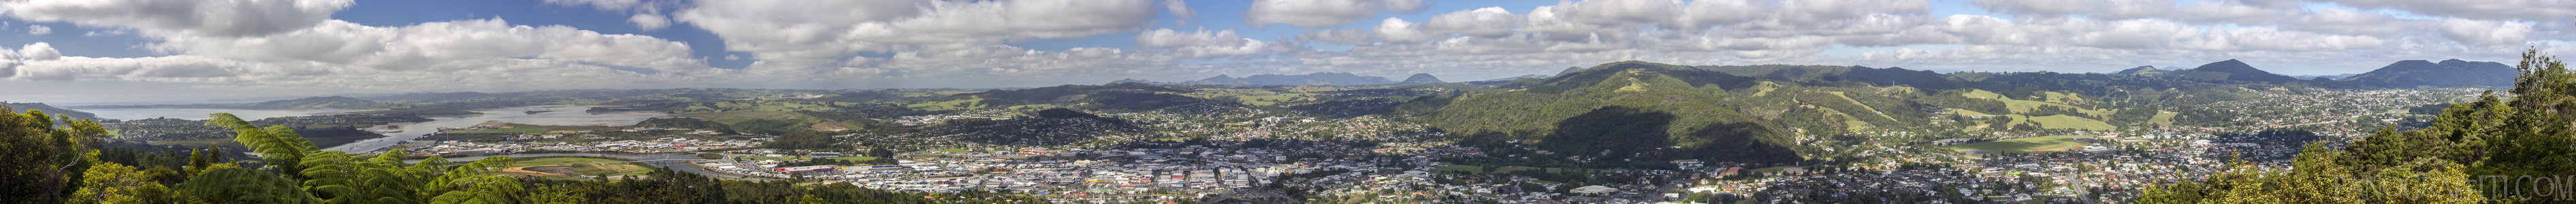 Whangarei from Mt Parihaka Lookout - A long hike or a short drive up to a nice view of Whangarei